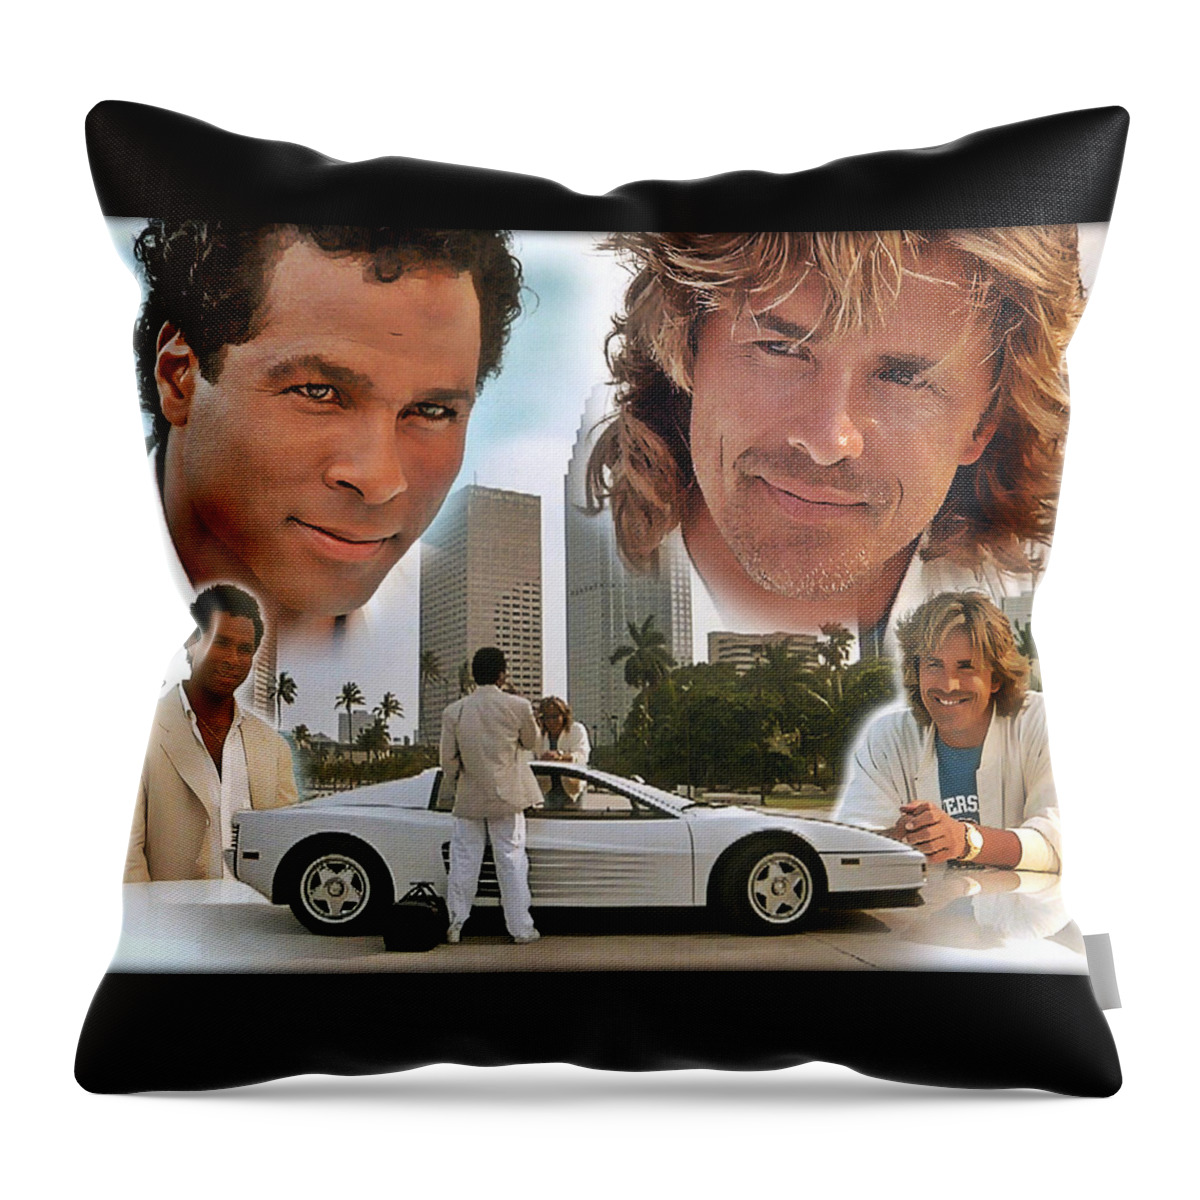 Miami Vice Throw Pillow featuring the painting Freefall 14 by Mark Baranowski